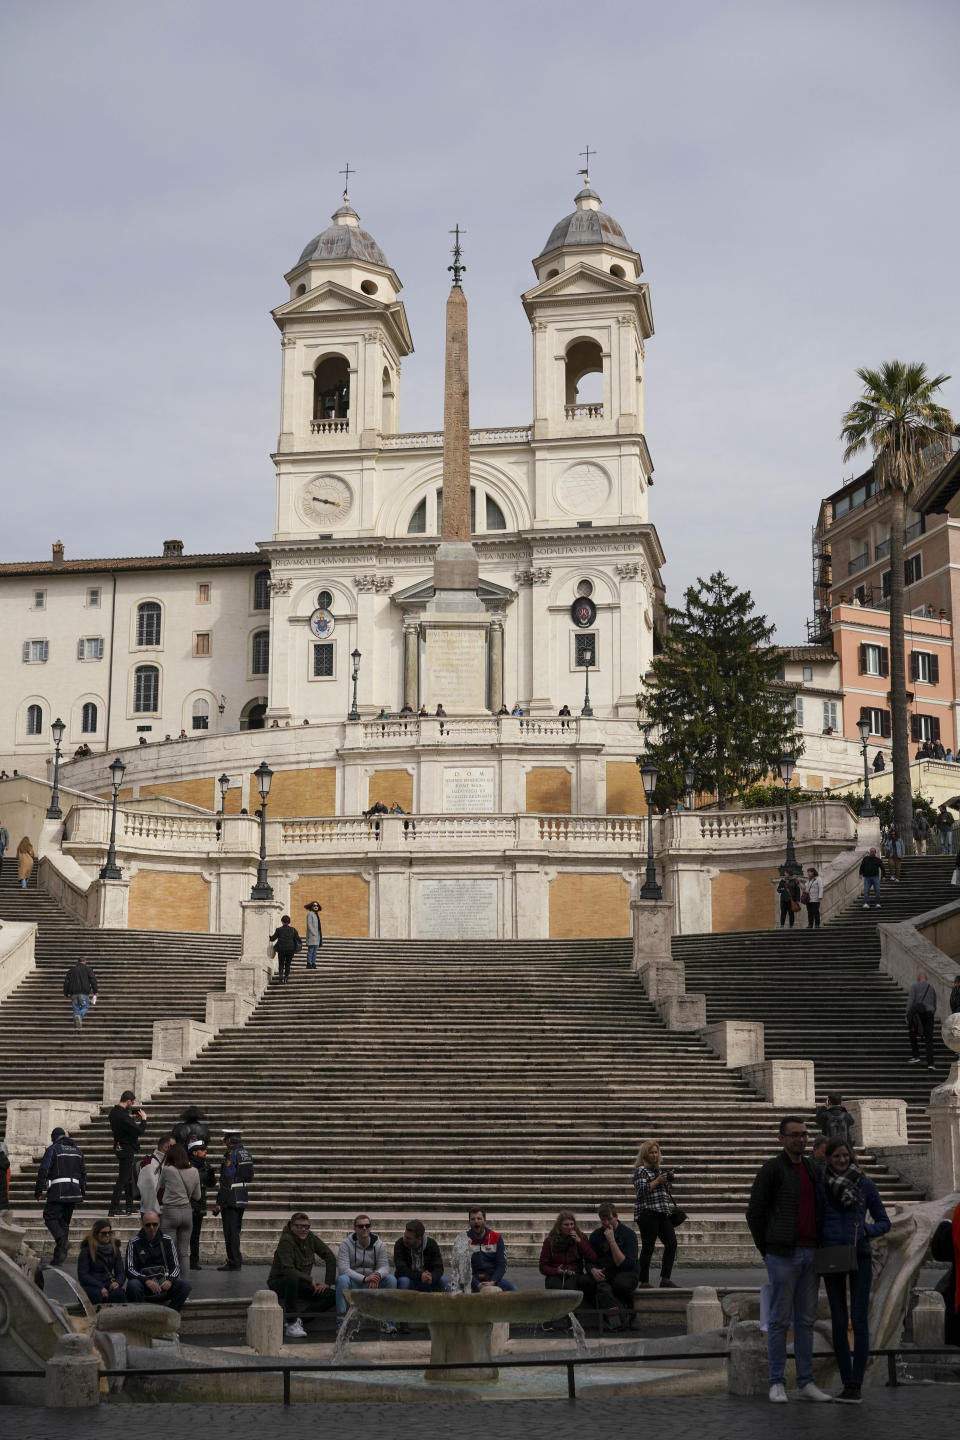 Few tourists gather at the Spanish Steps, in Rome, Thursday, March 5, 2020. Italy's virus outbreak has been concentrated in the northern region of Lombardy, but fears over how the virus is spreading inside and outside the country has prompted the government to close all schools and Universities nationwide for two weeks. (AP Photo/Andrew Medichini)